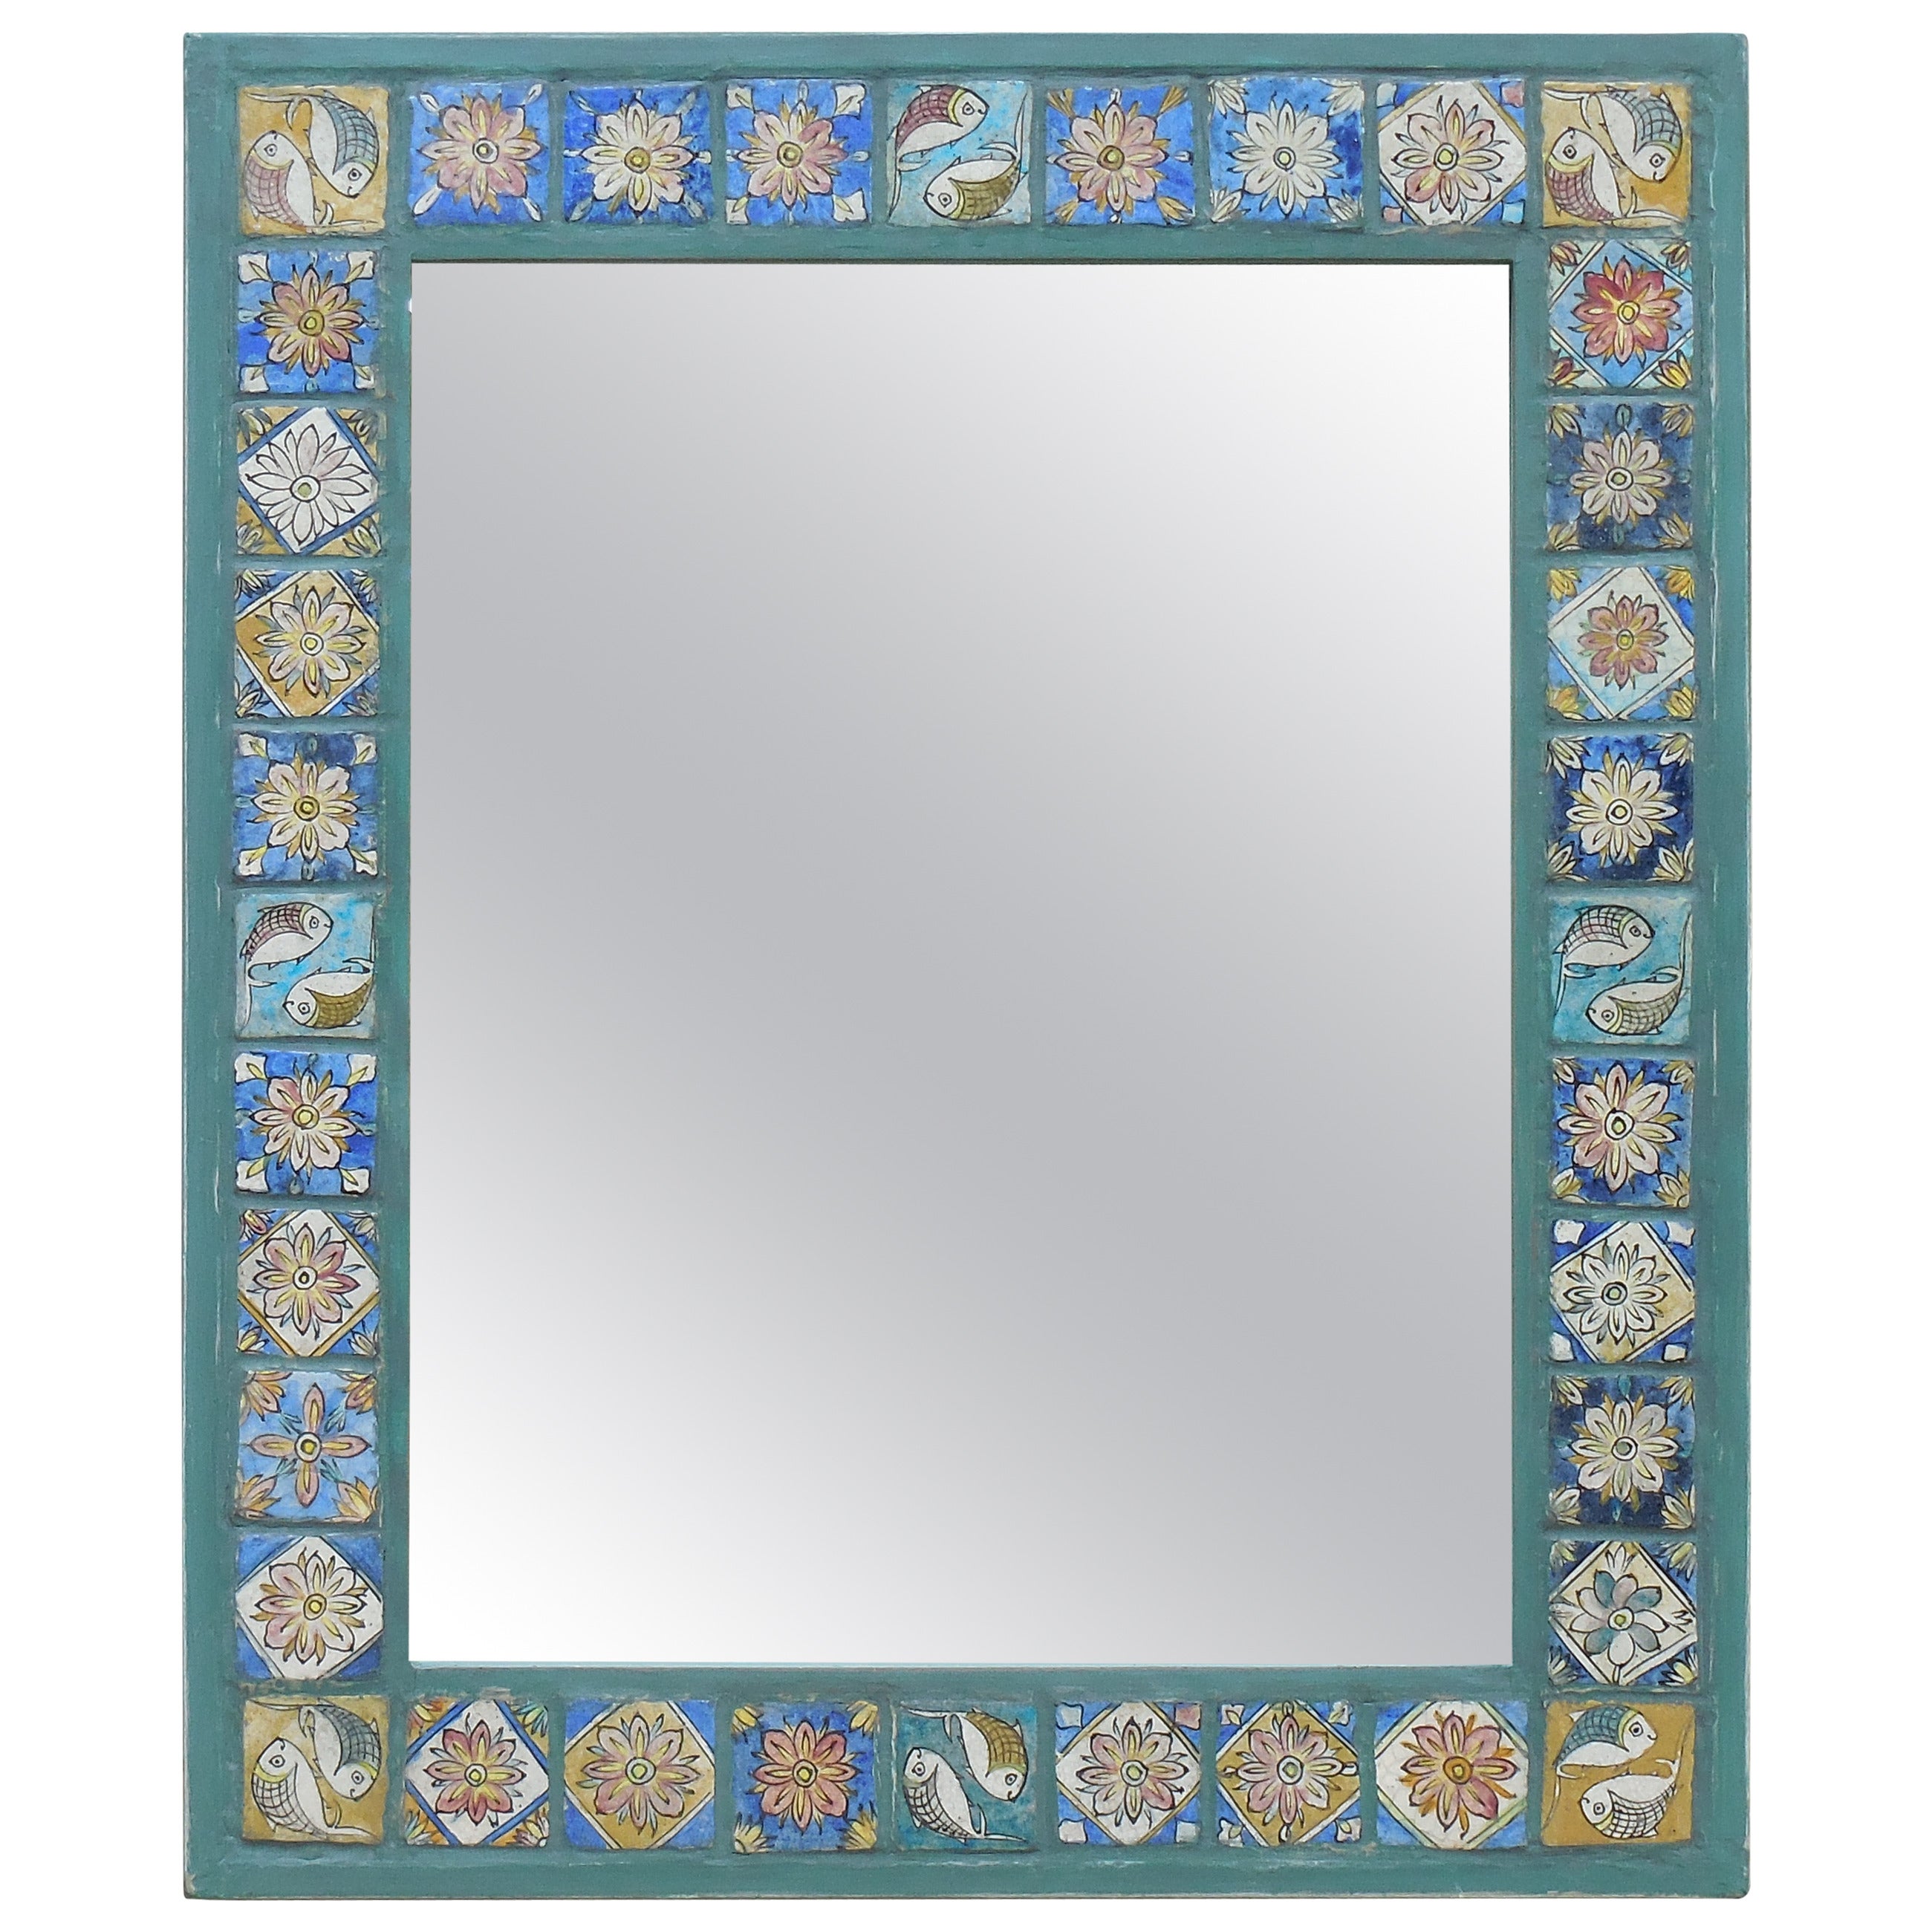 One-of-a-Kind Persian Tile Mirror